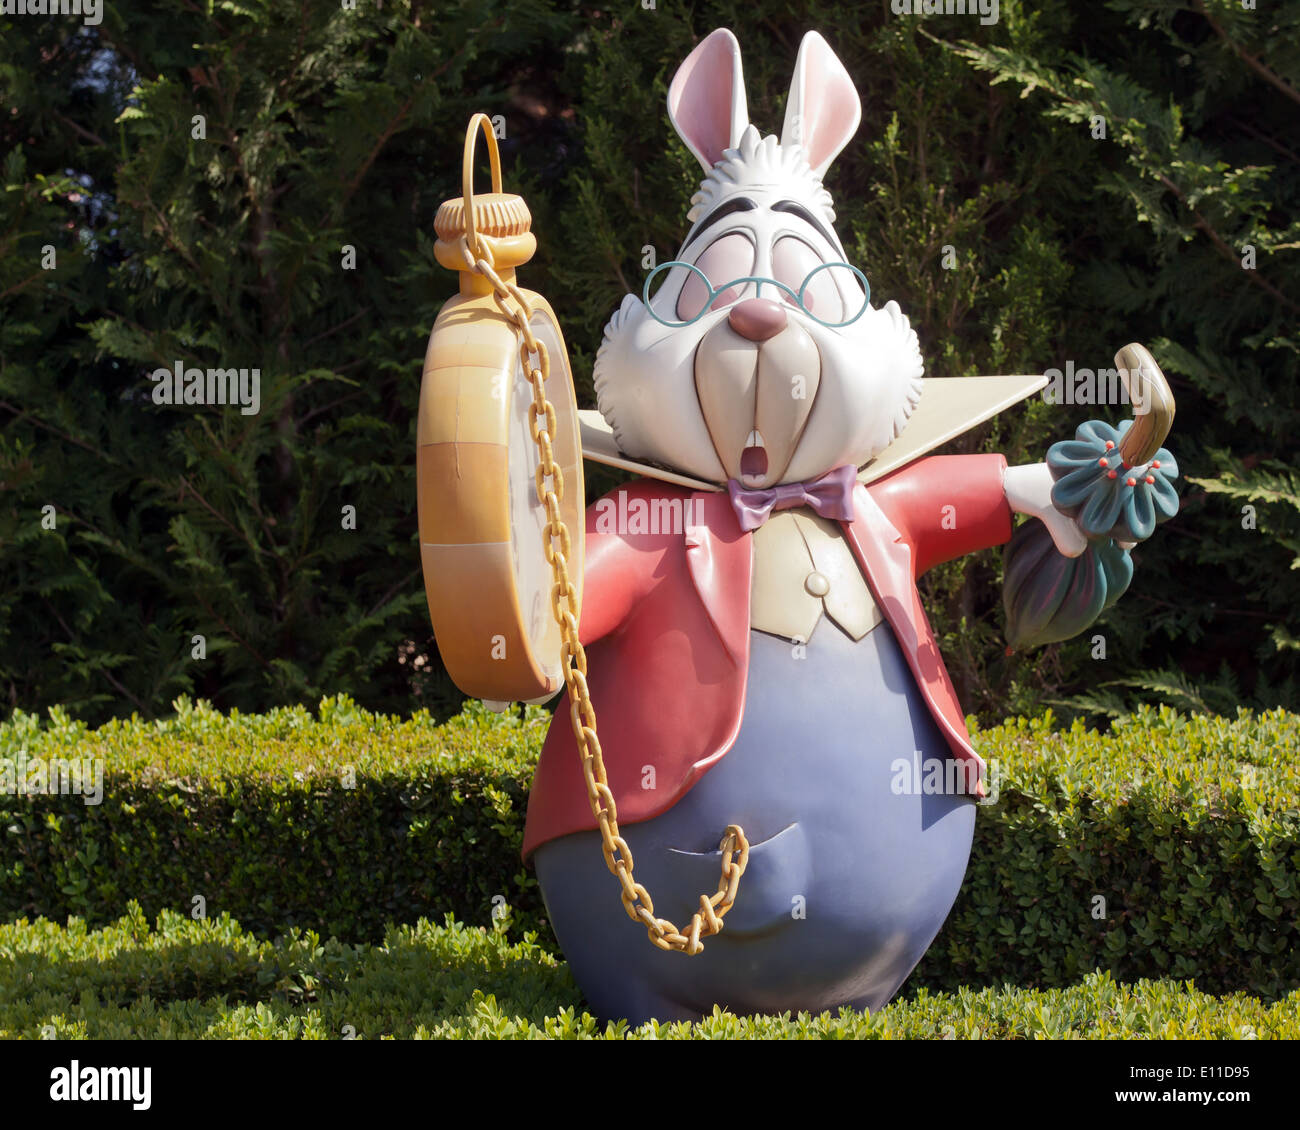 A model of the White Rabbit, from   Alice's Adventures in Wonderland, in Alice's Curious Labyrinth, Disneyland Paris. Stock Photo